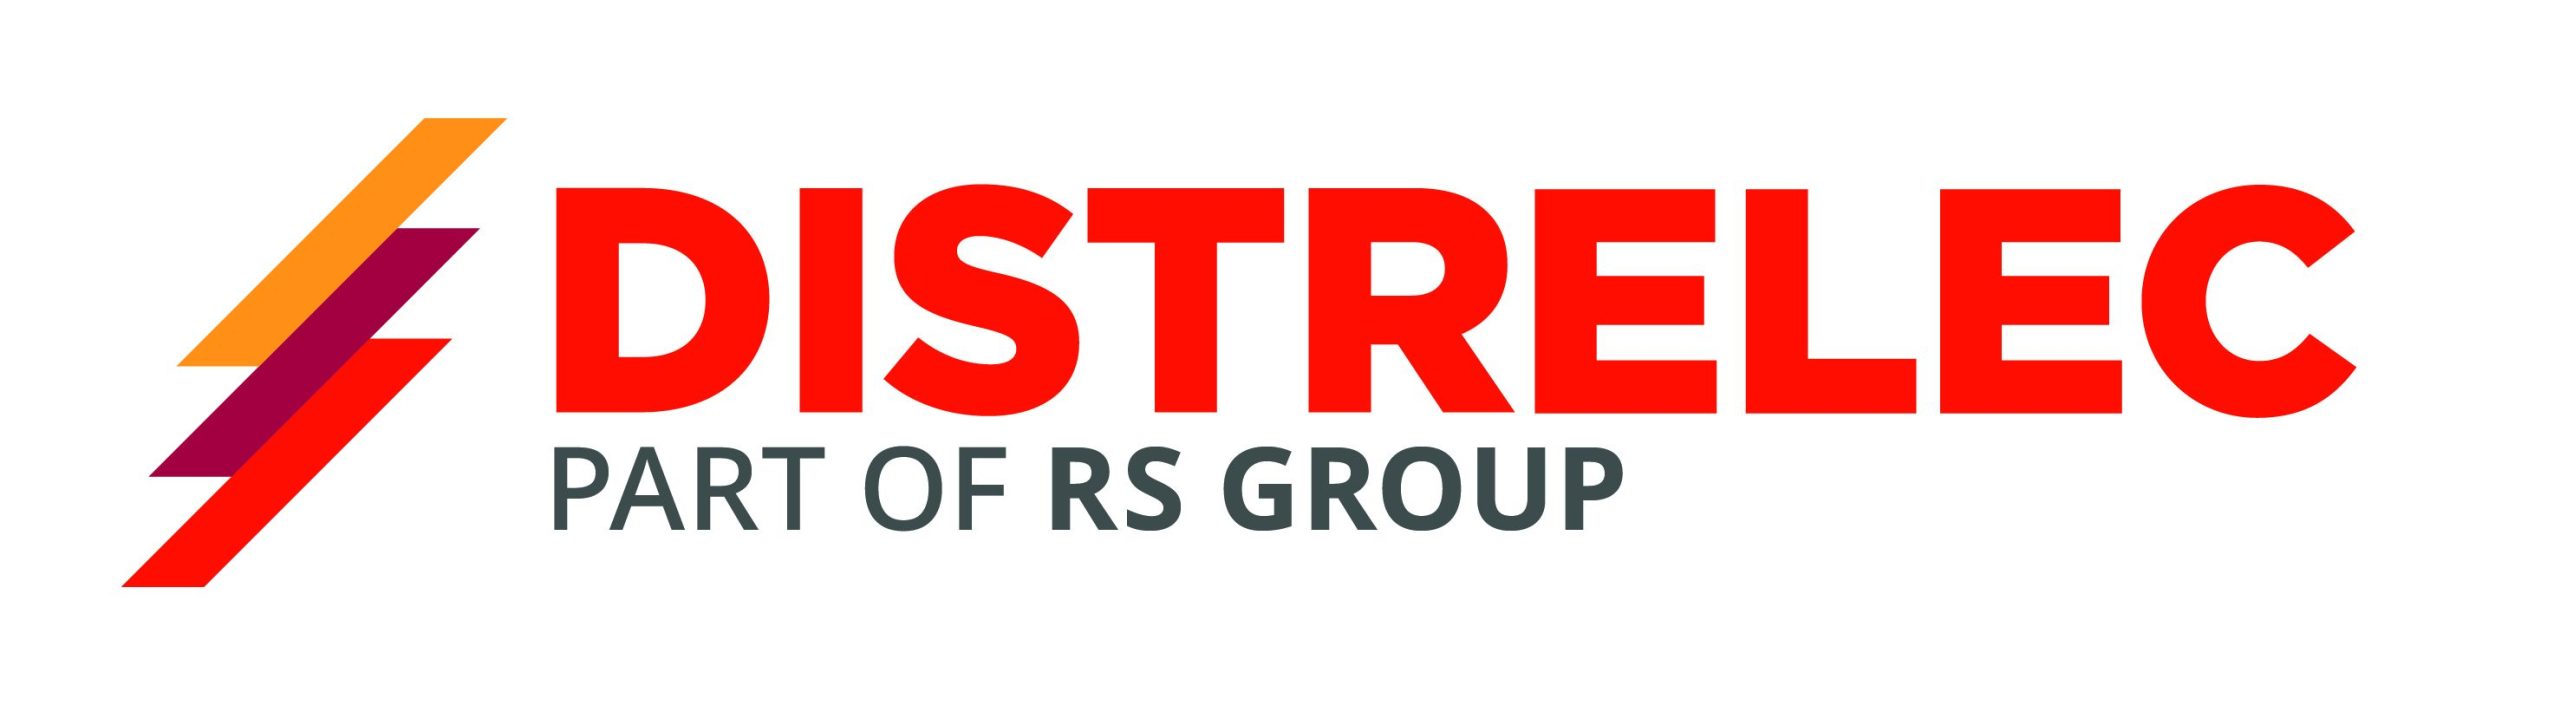 RS Group completes acquisition of Distrelec